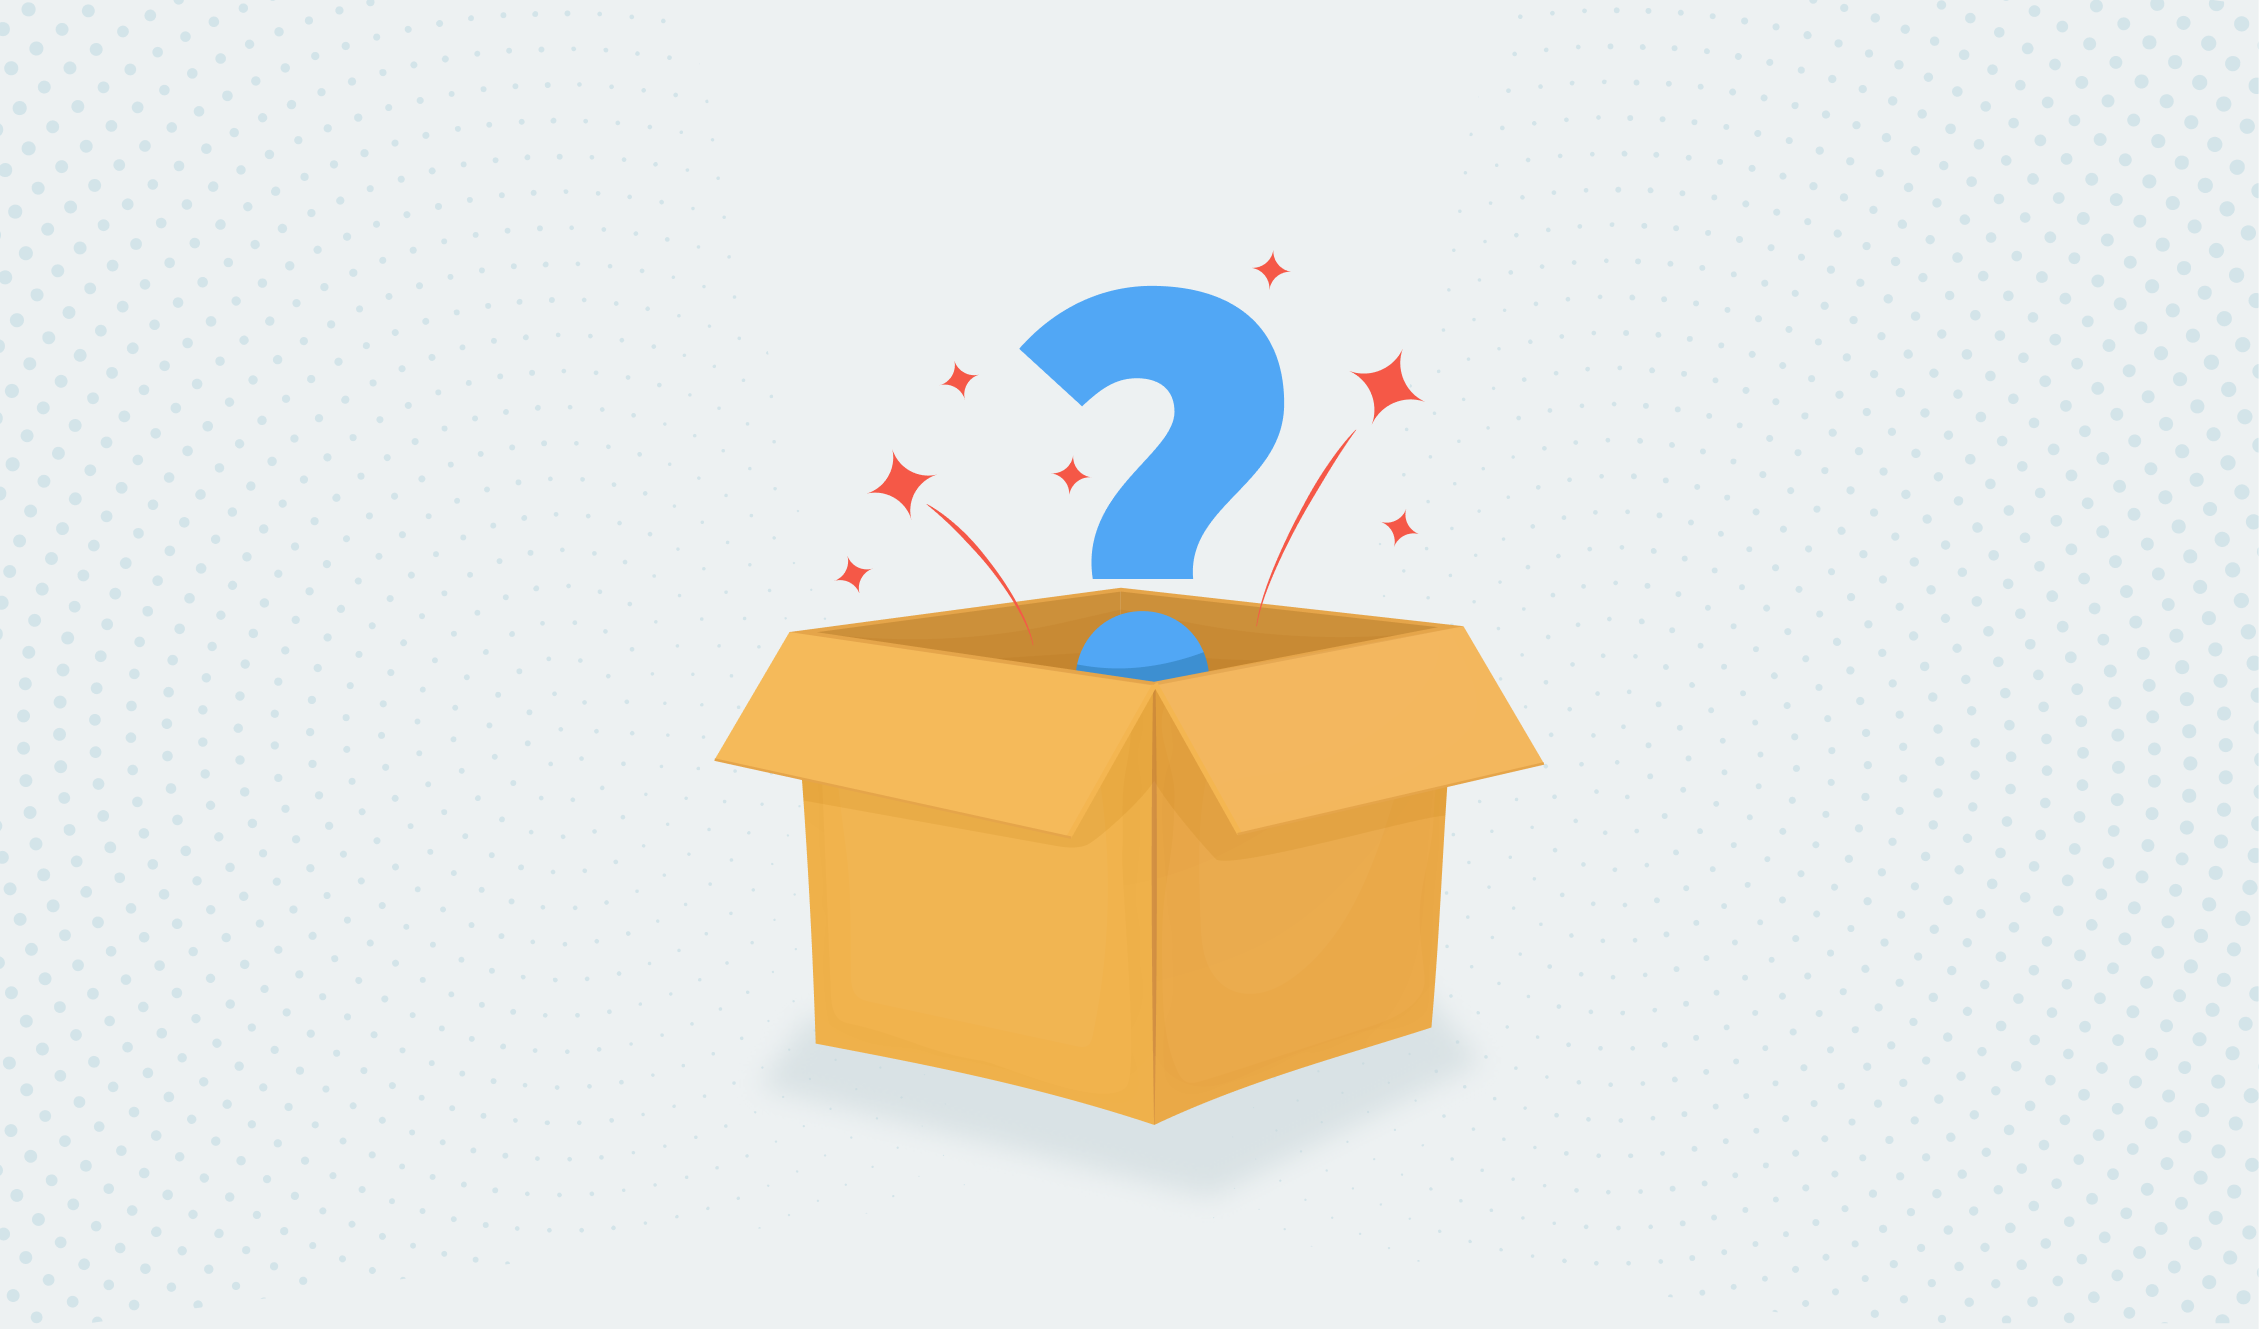 Are  Mystery Boxes Worth It?